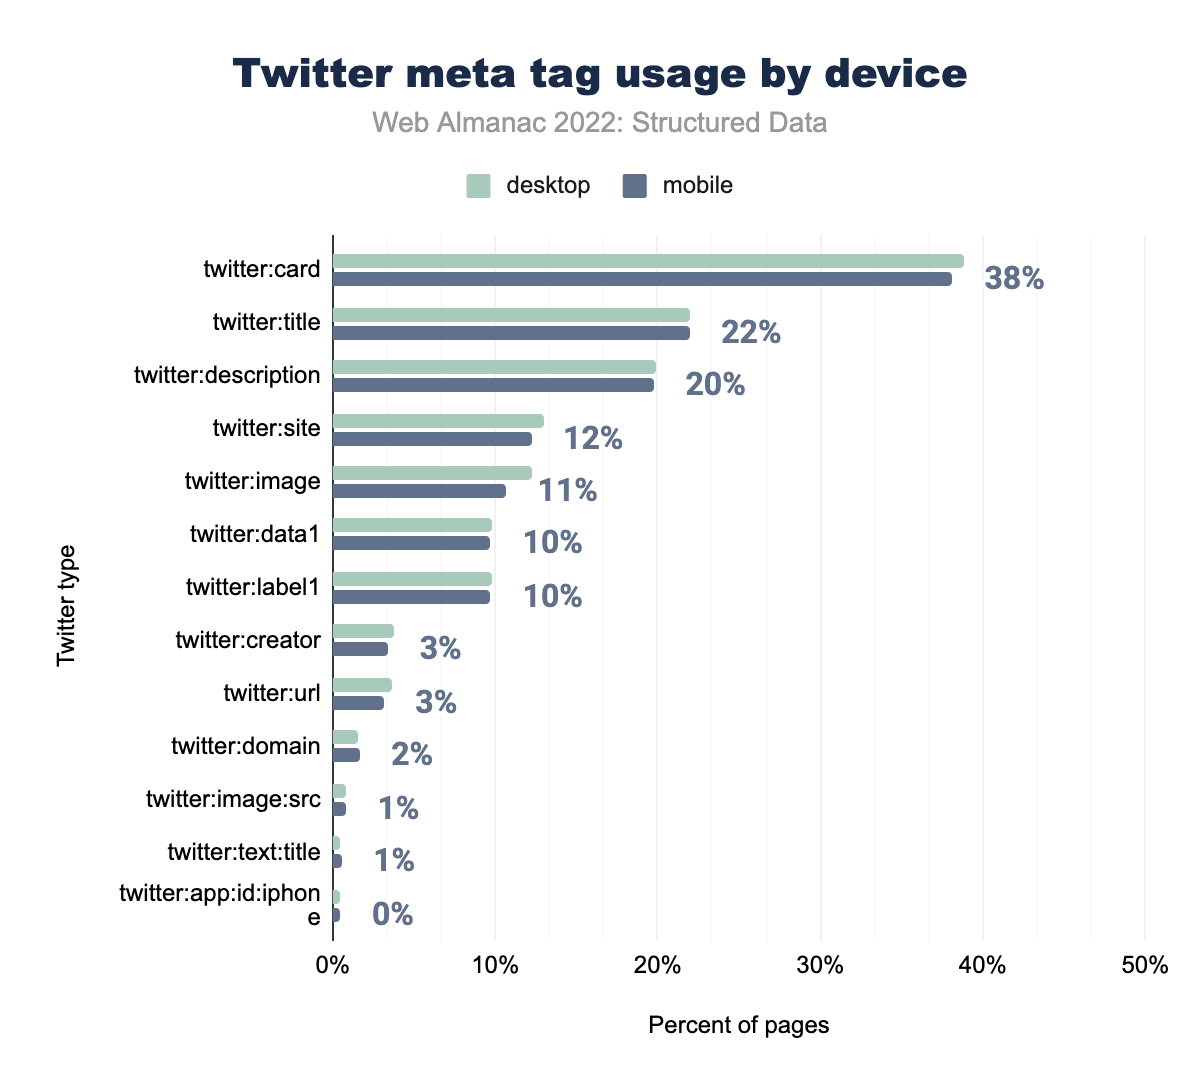 Twitter meta tag usage by device